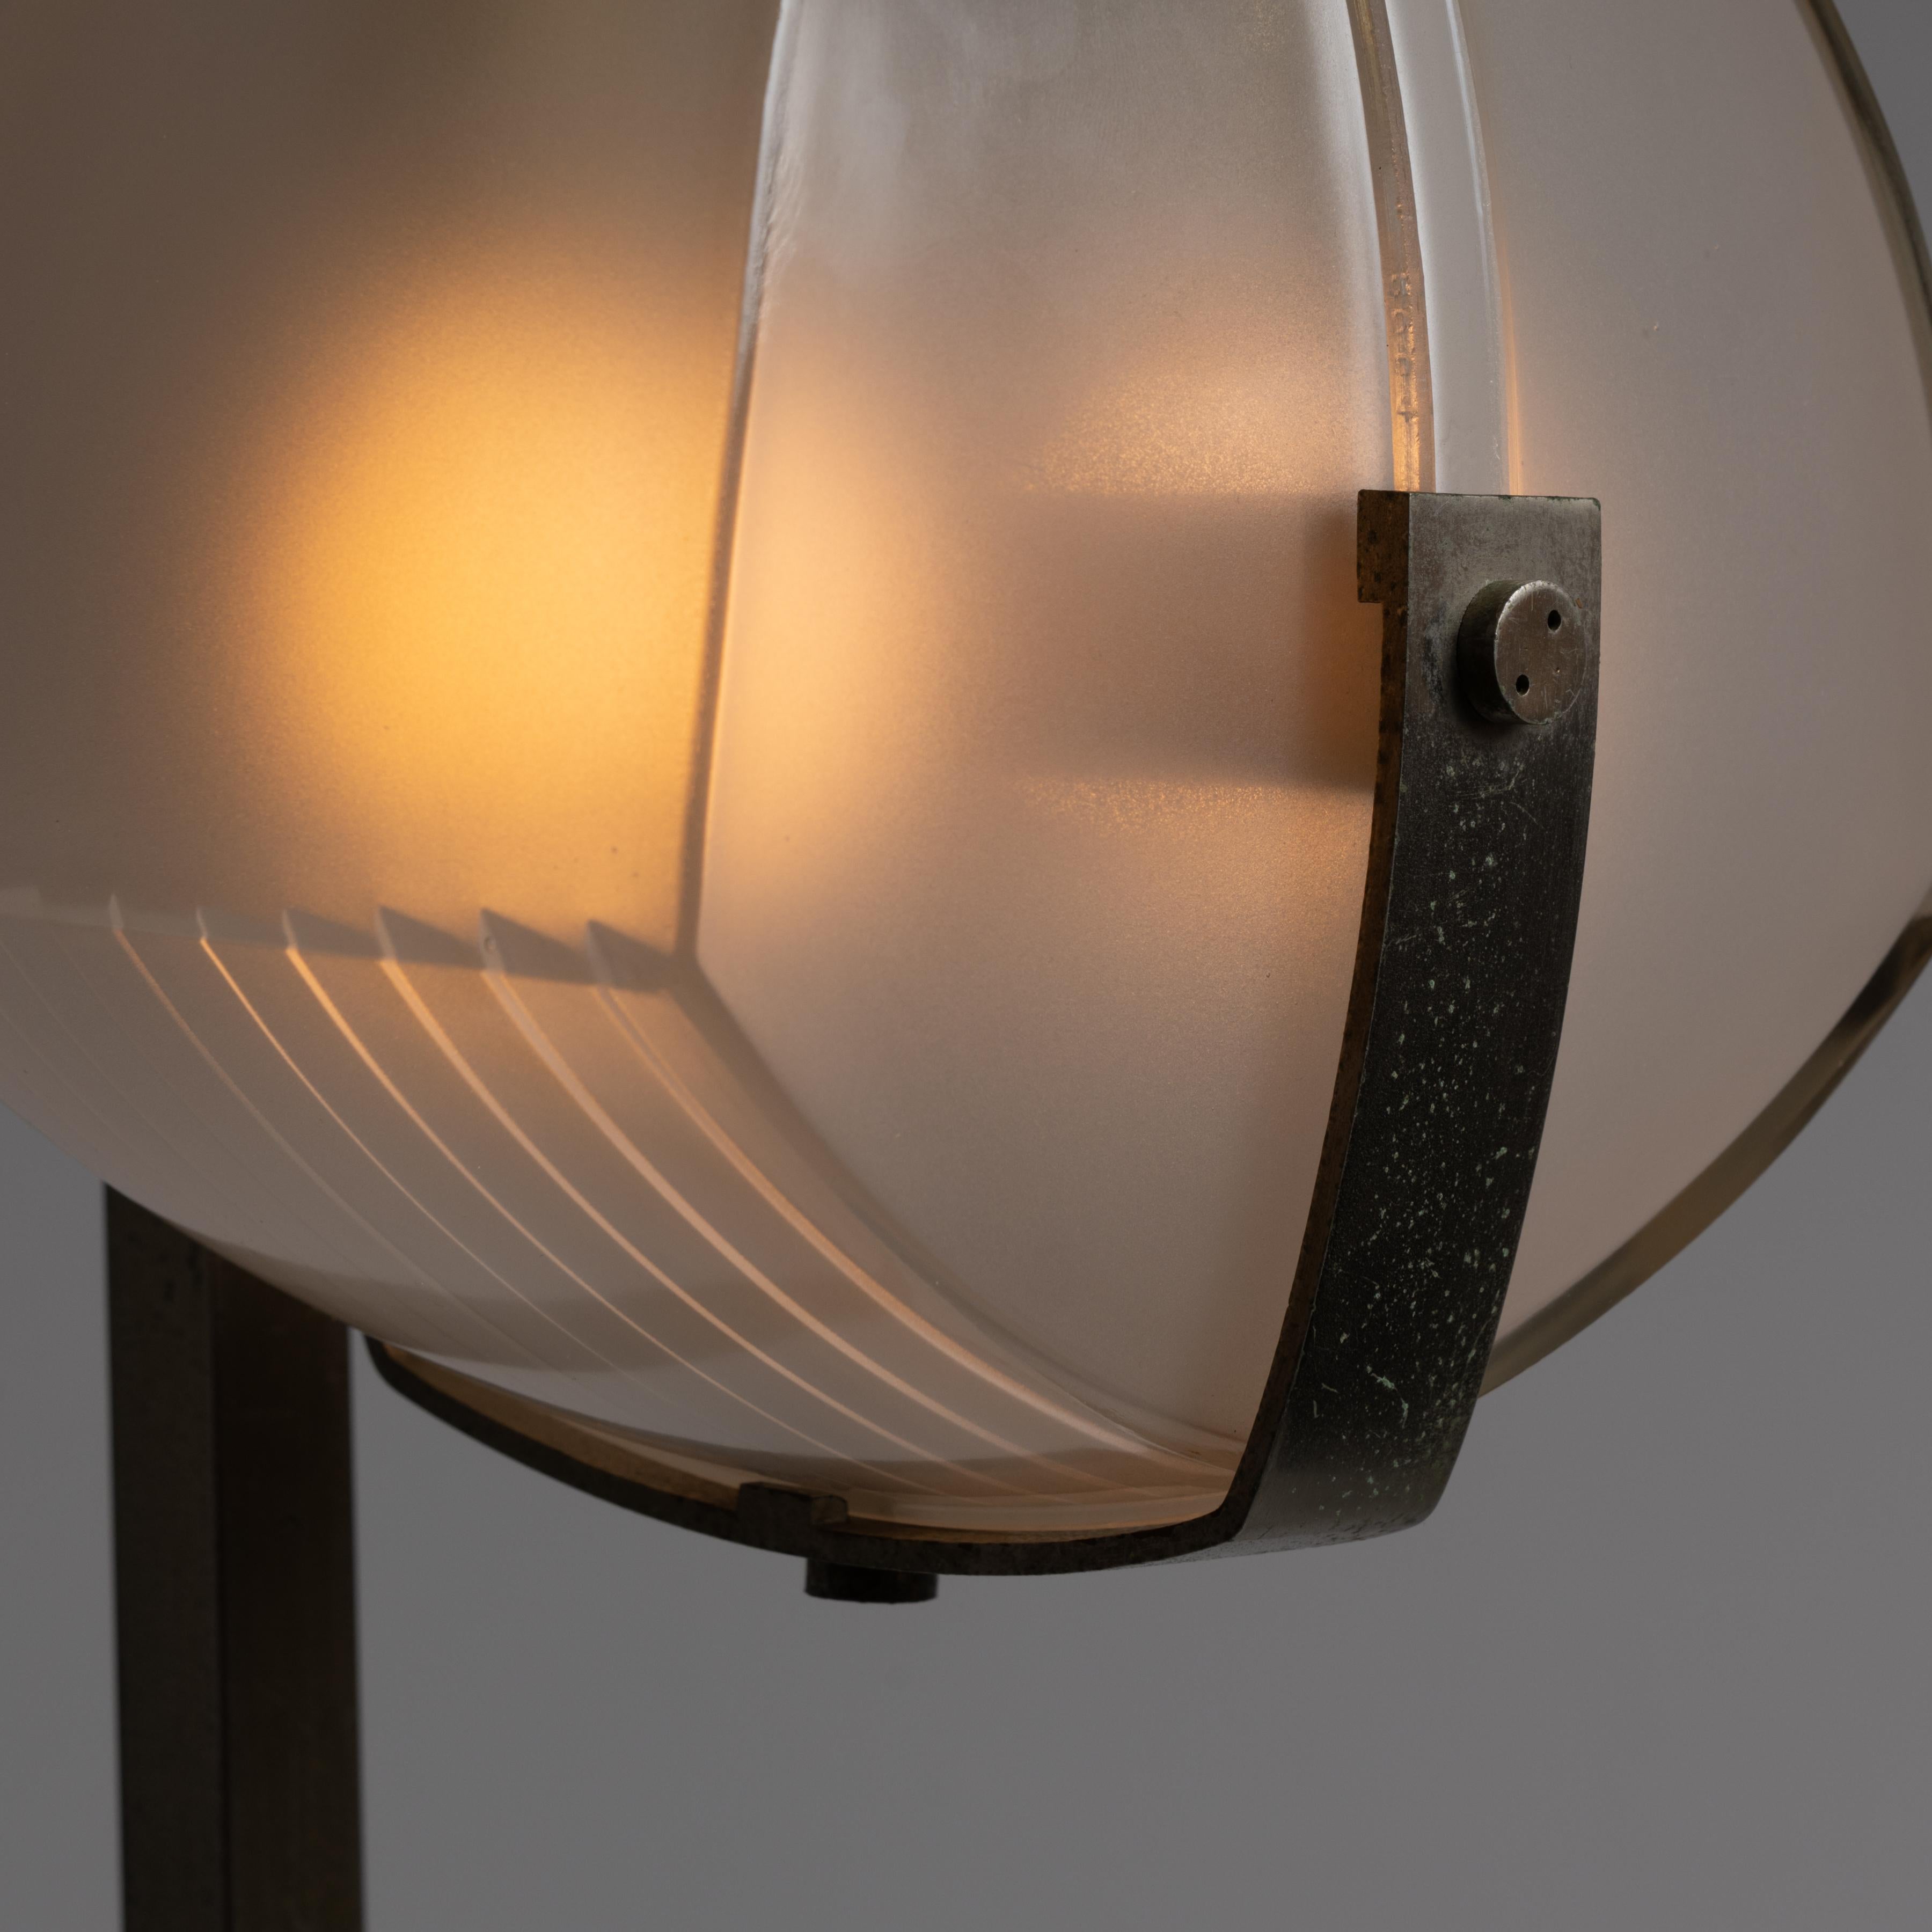 Mid-20th Century Single 'Omicron' Floor Lamp by Vico Magistretti for Artemide